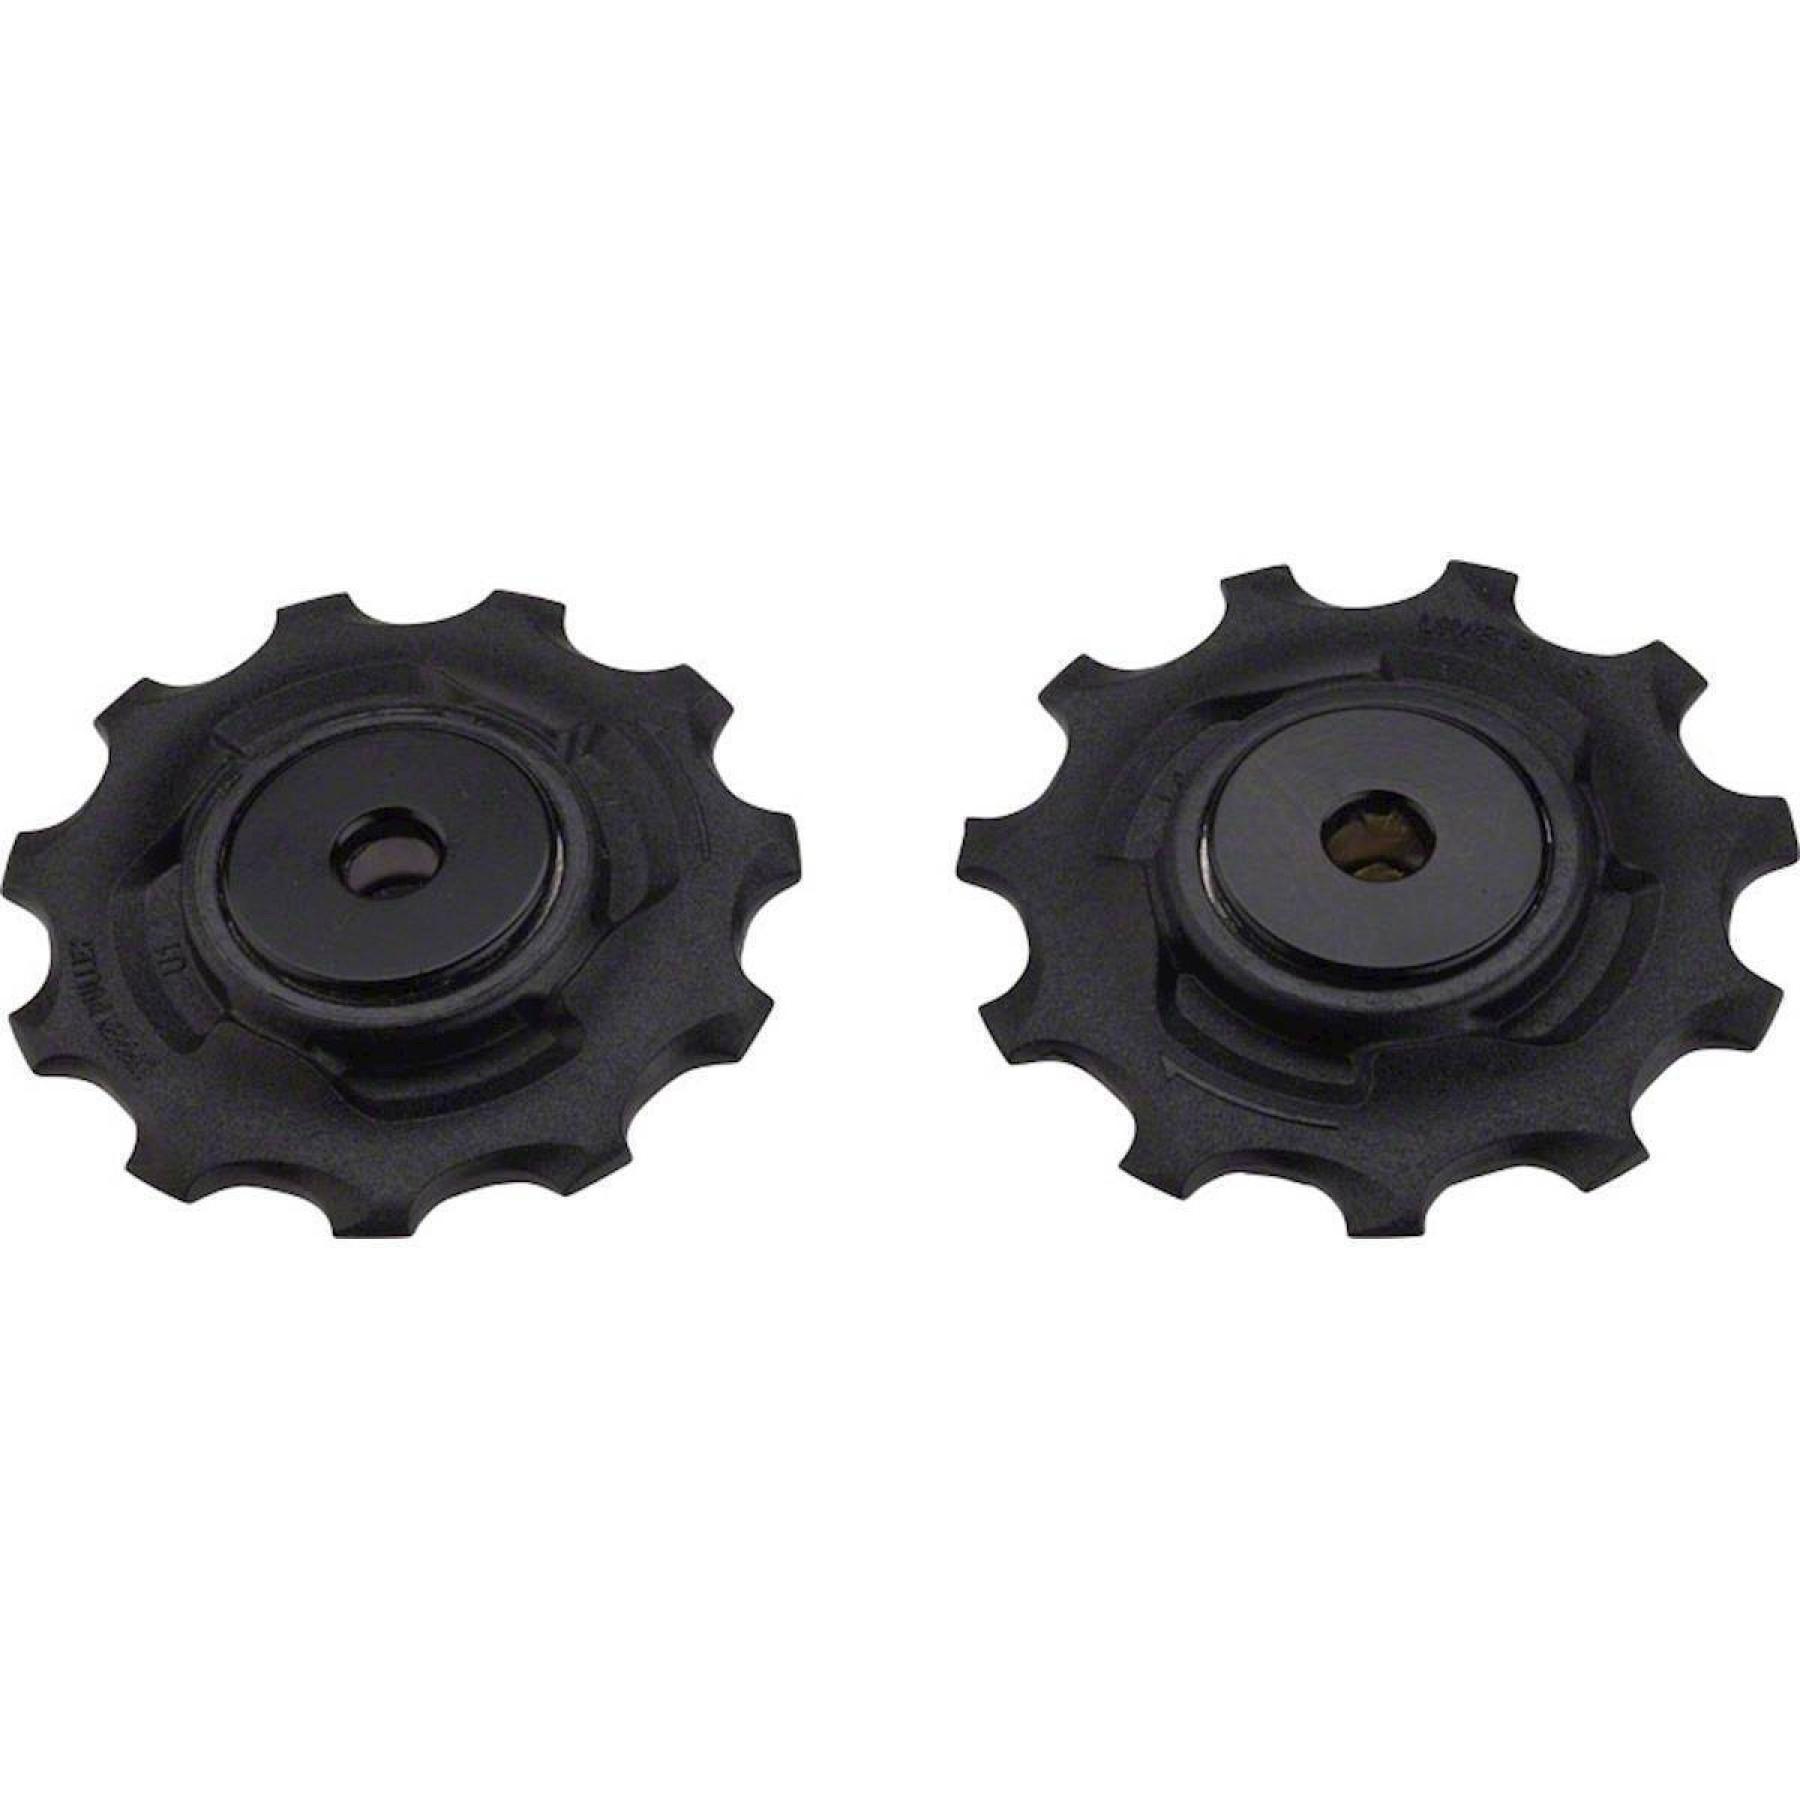 Rulle Sram X9/X7 Type2 Rd Pulley Kit